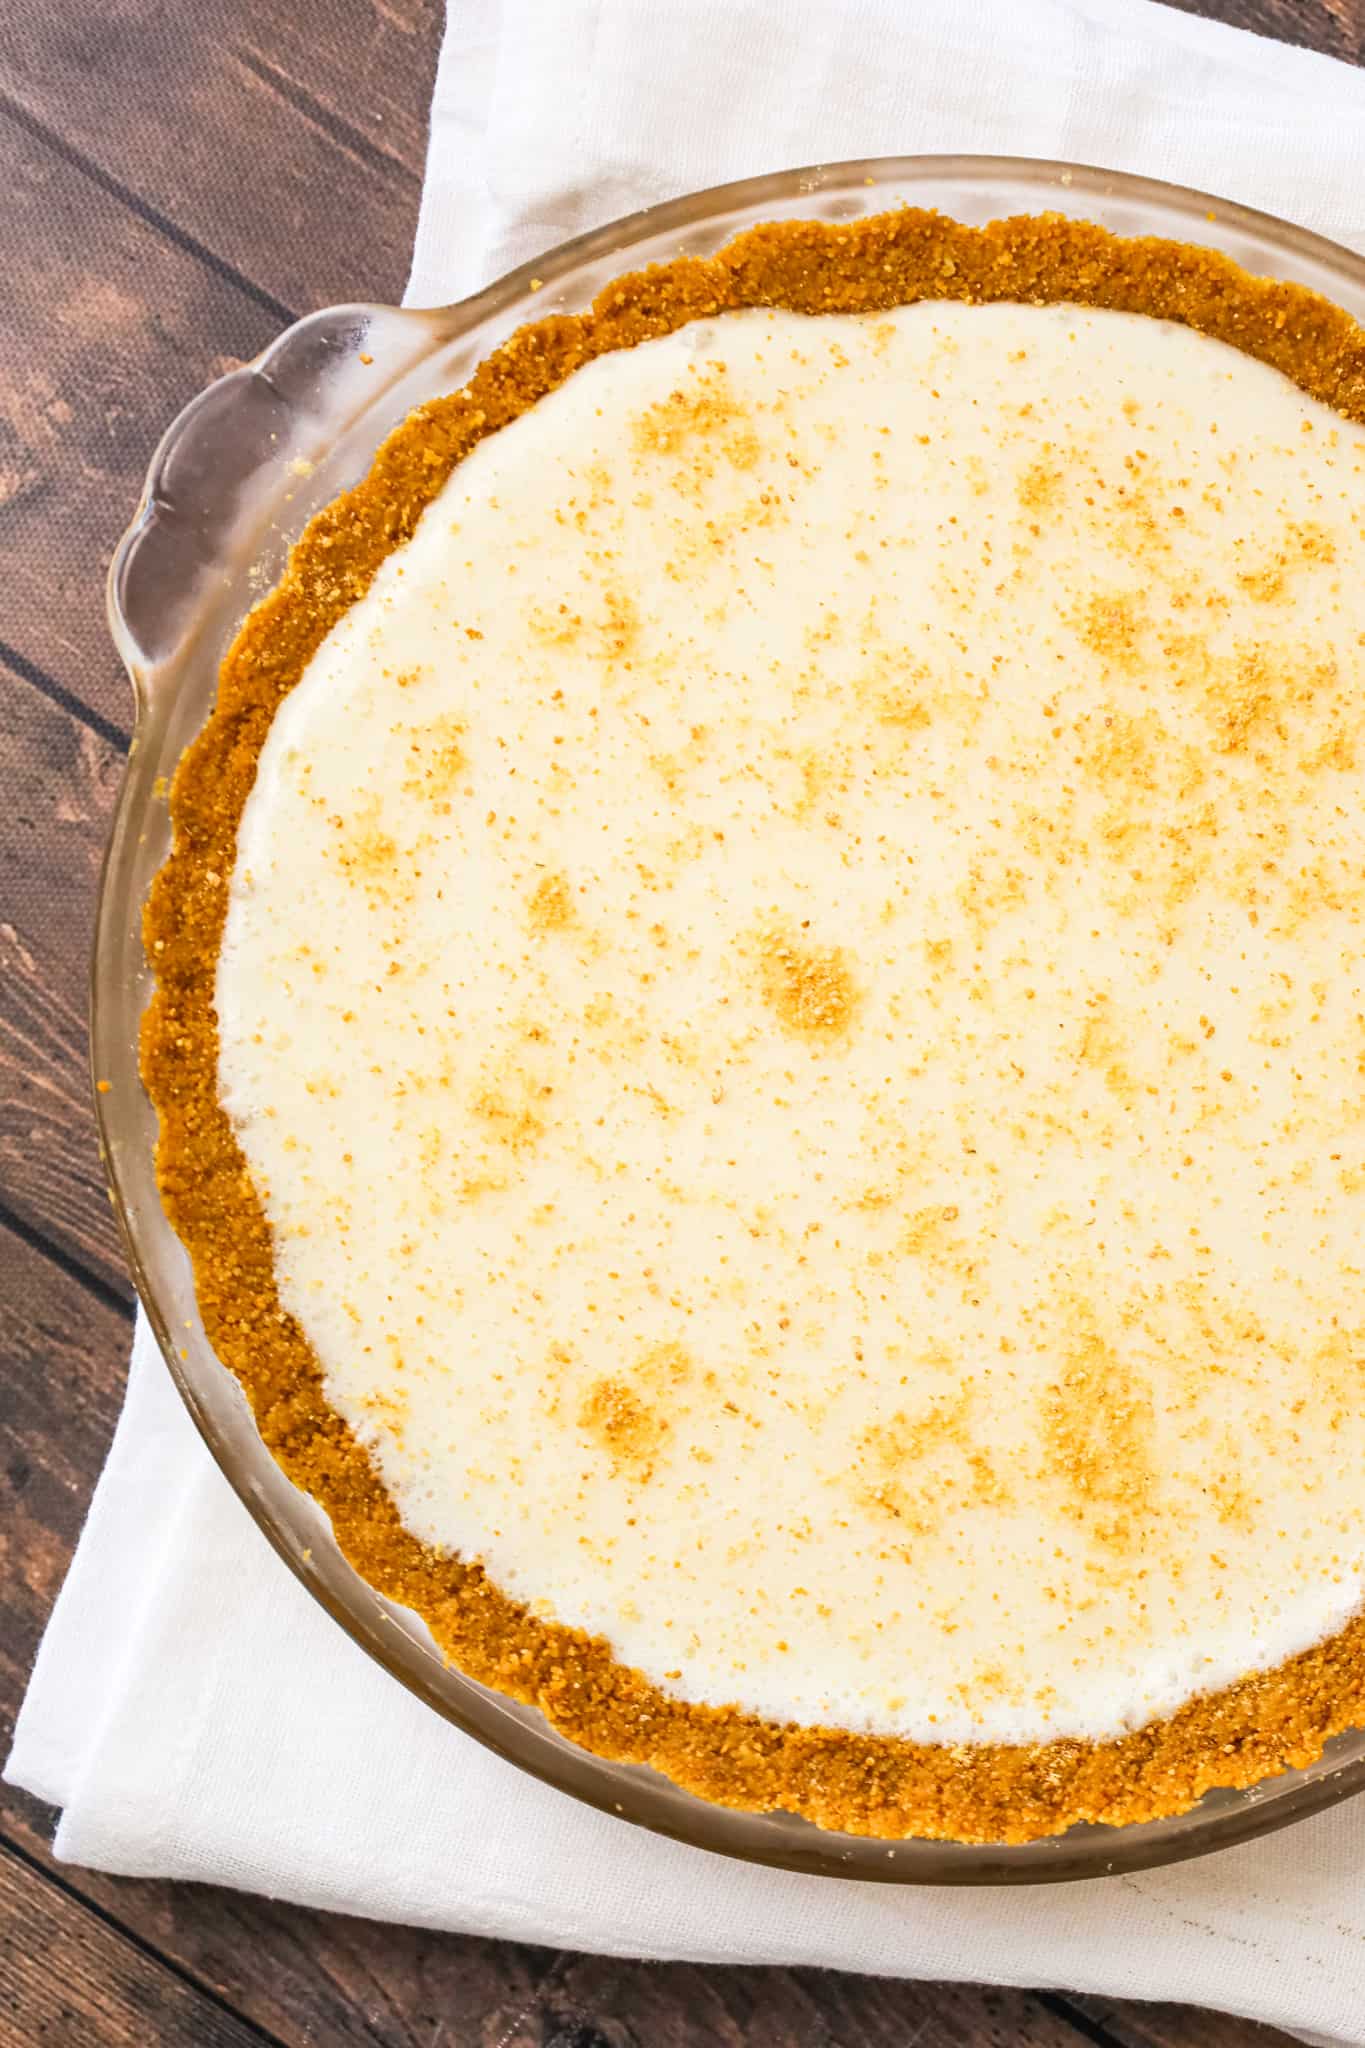 Marshmallow Pie is a tasty dessert recipe with a fluffy marshmallow filling in a graham cracker crust.